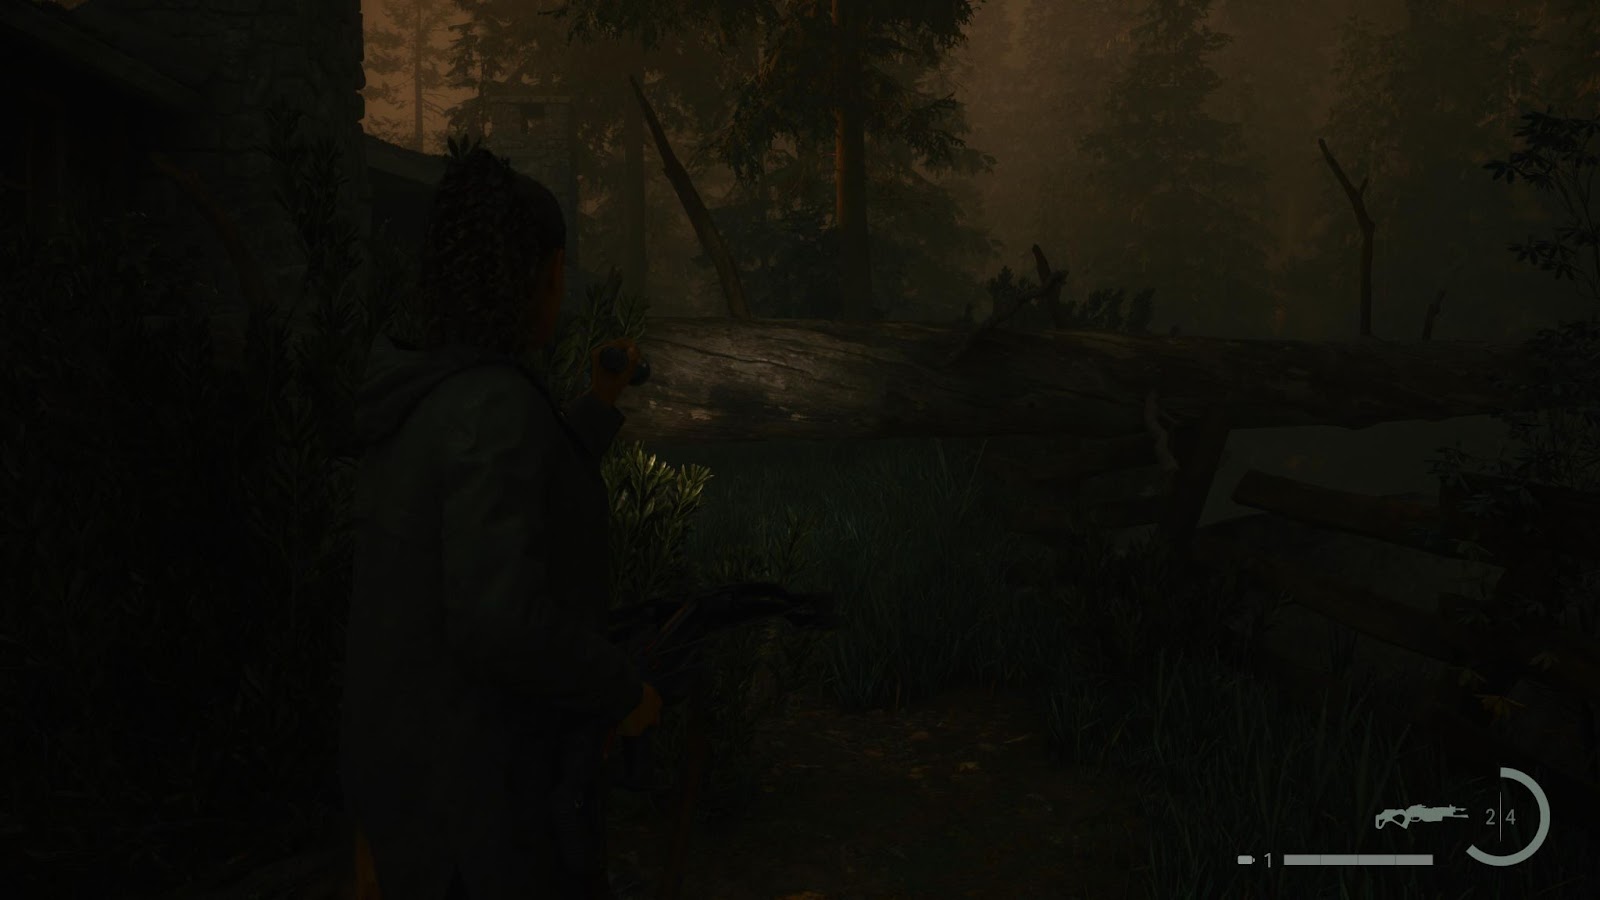 An in game screenshot of the fallen tree in the rental cabins area in Cauldron Lake from Alan Wake 2